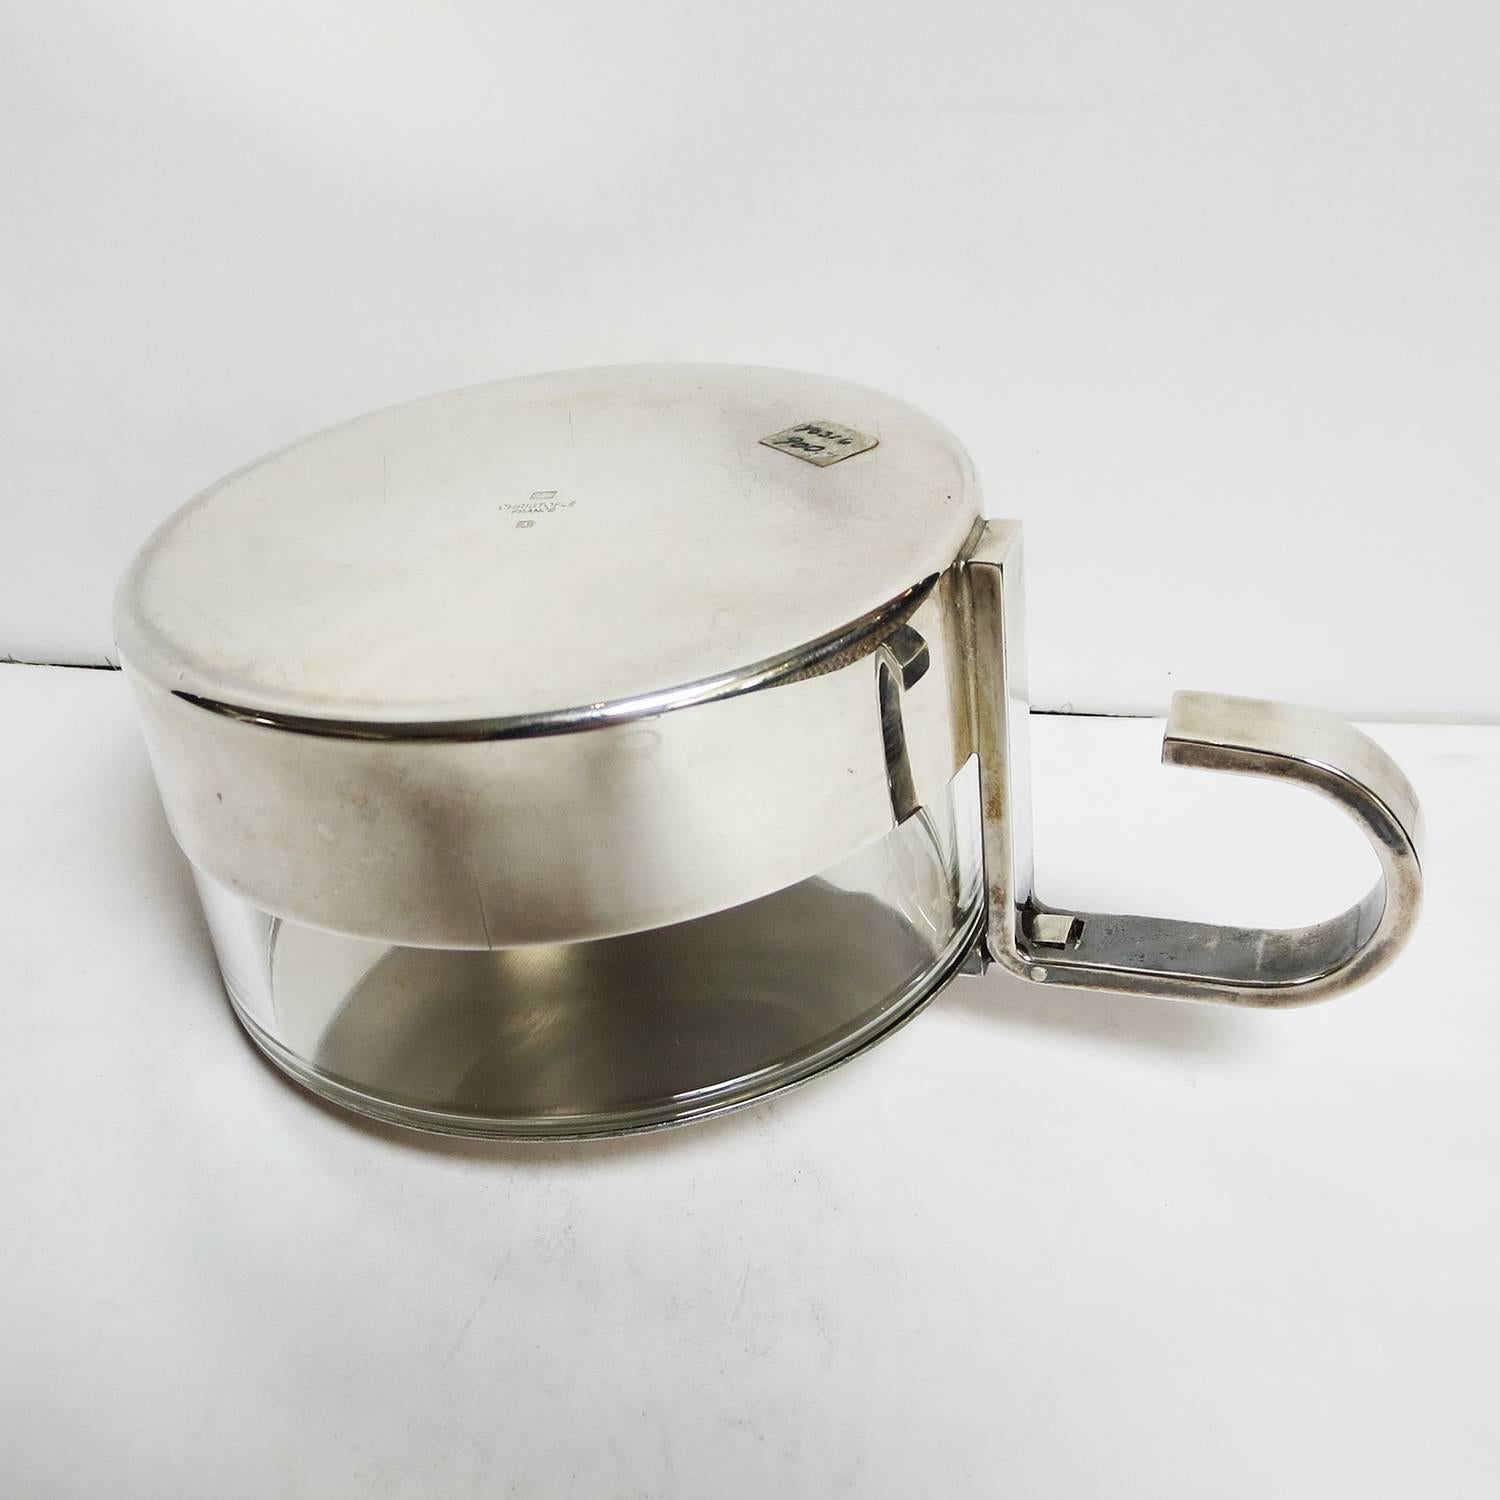 A very clean and modern design by Christofle of France. The bowl is in perfect condition, and displays very well. Stamped on the underside of the silver.